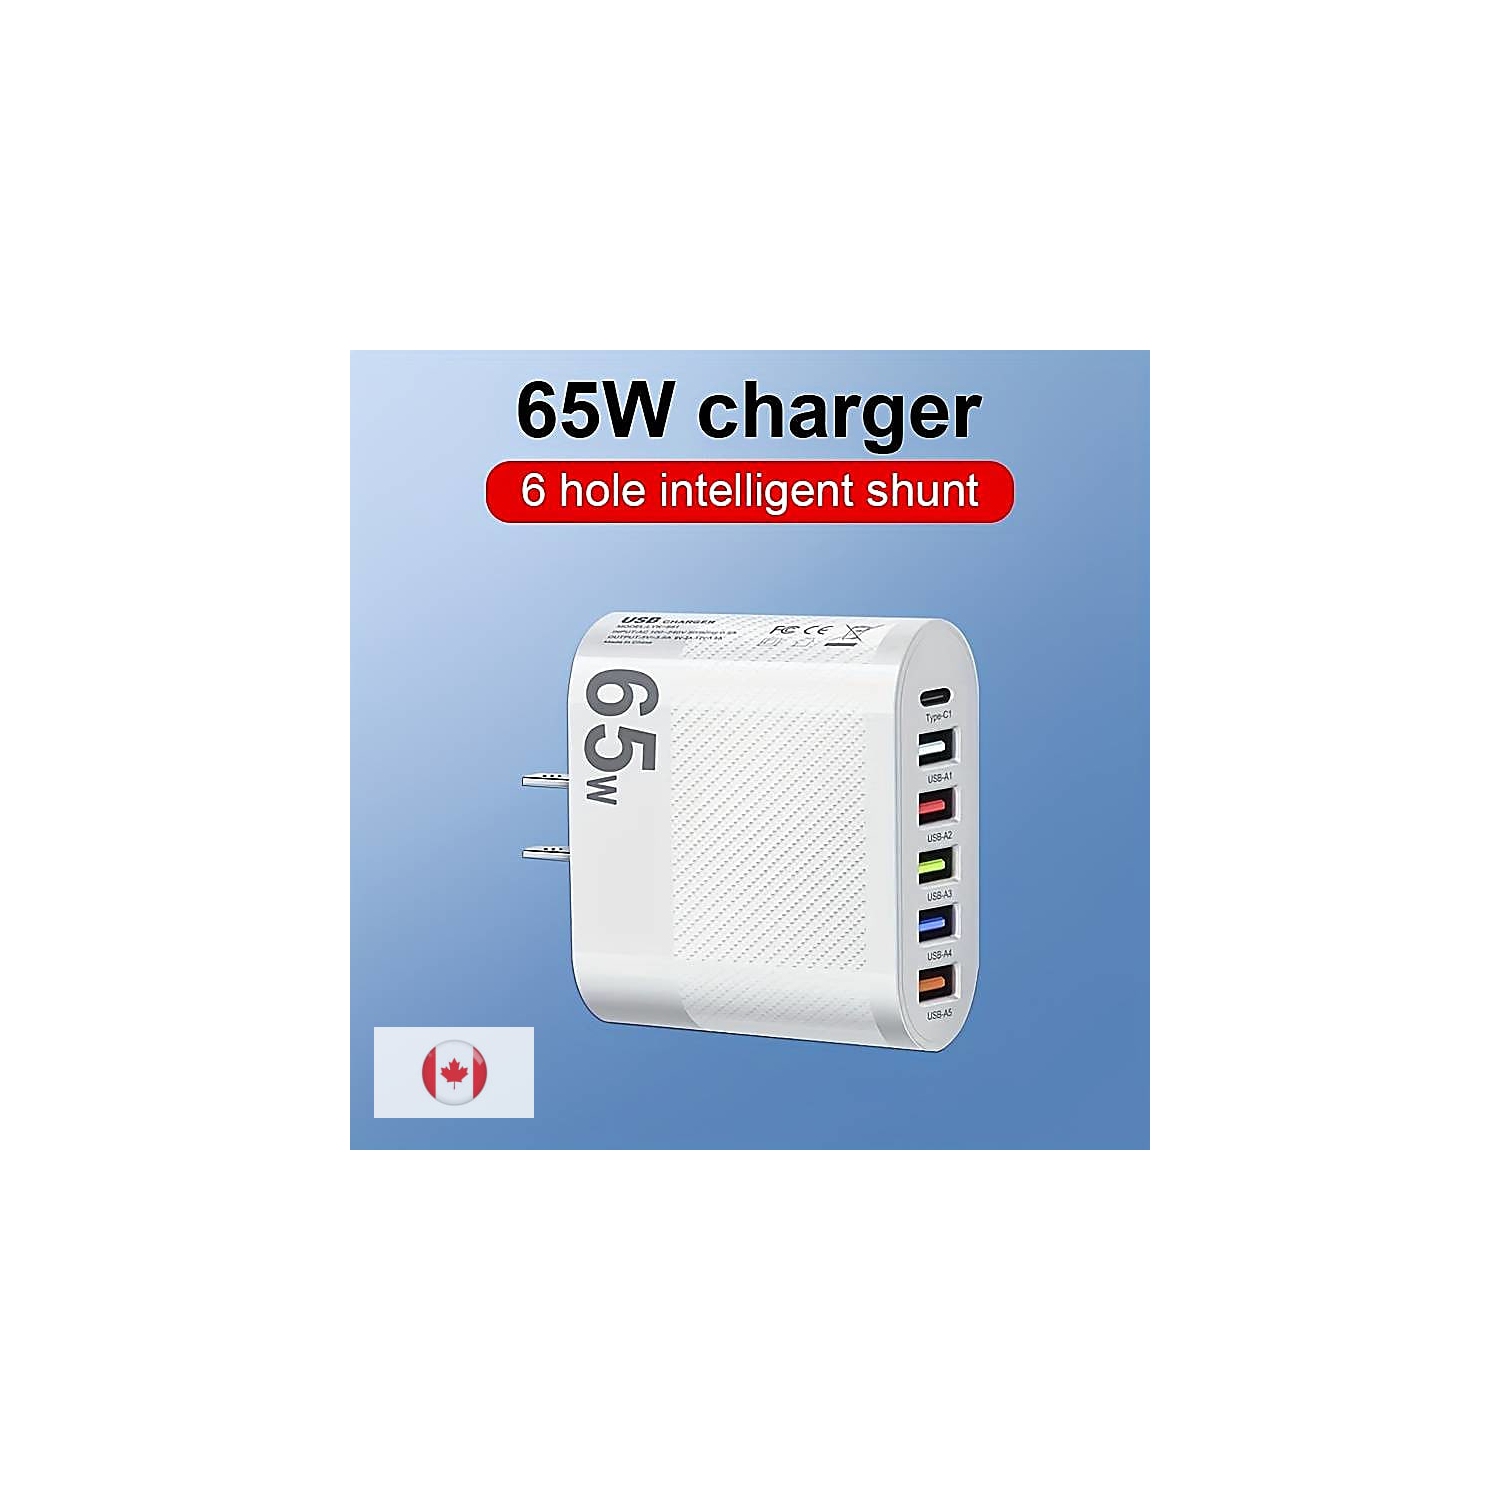 6 Ports 65W PD fast wall charger block universal lightening for iPhone iPad Samsung LG OnePlus Google Pixel Android Apple watch